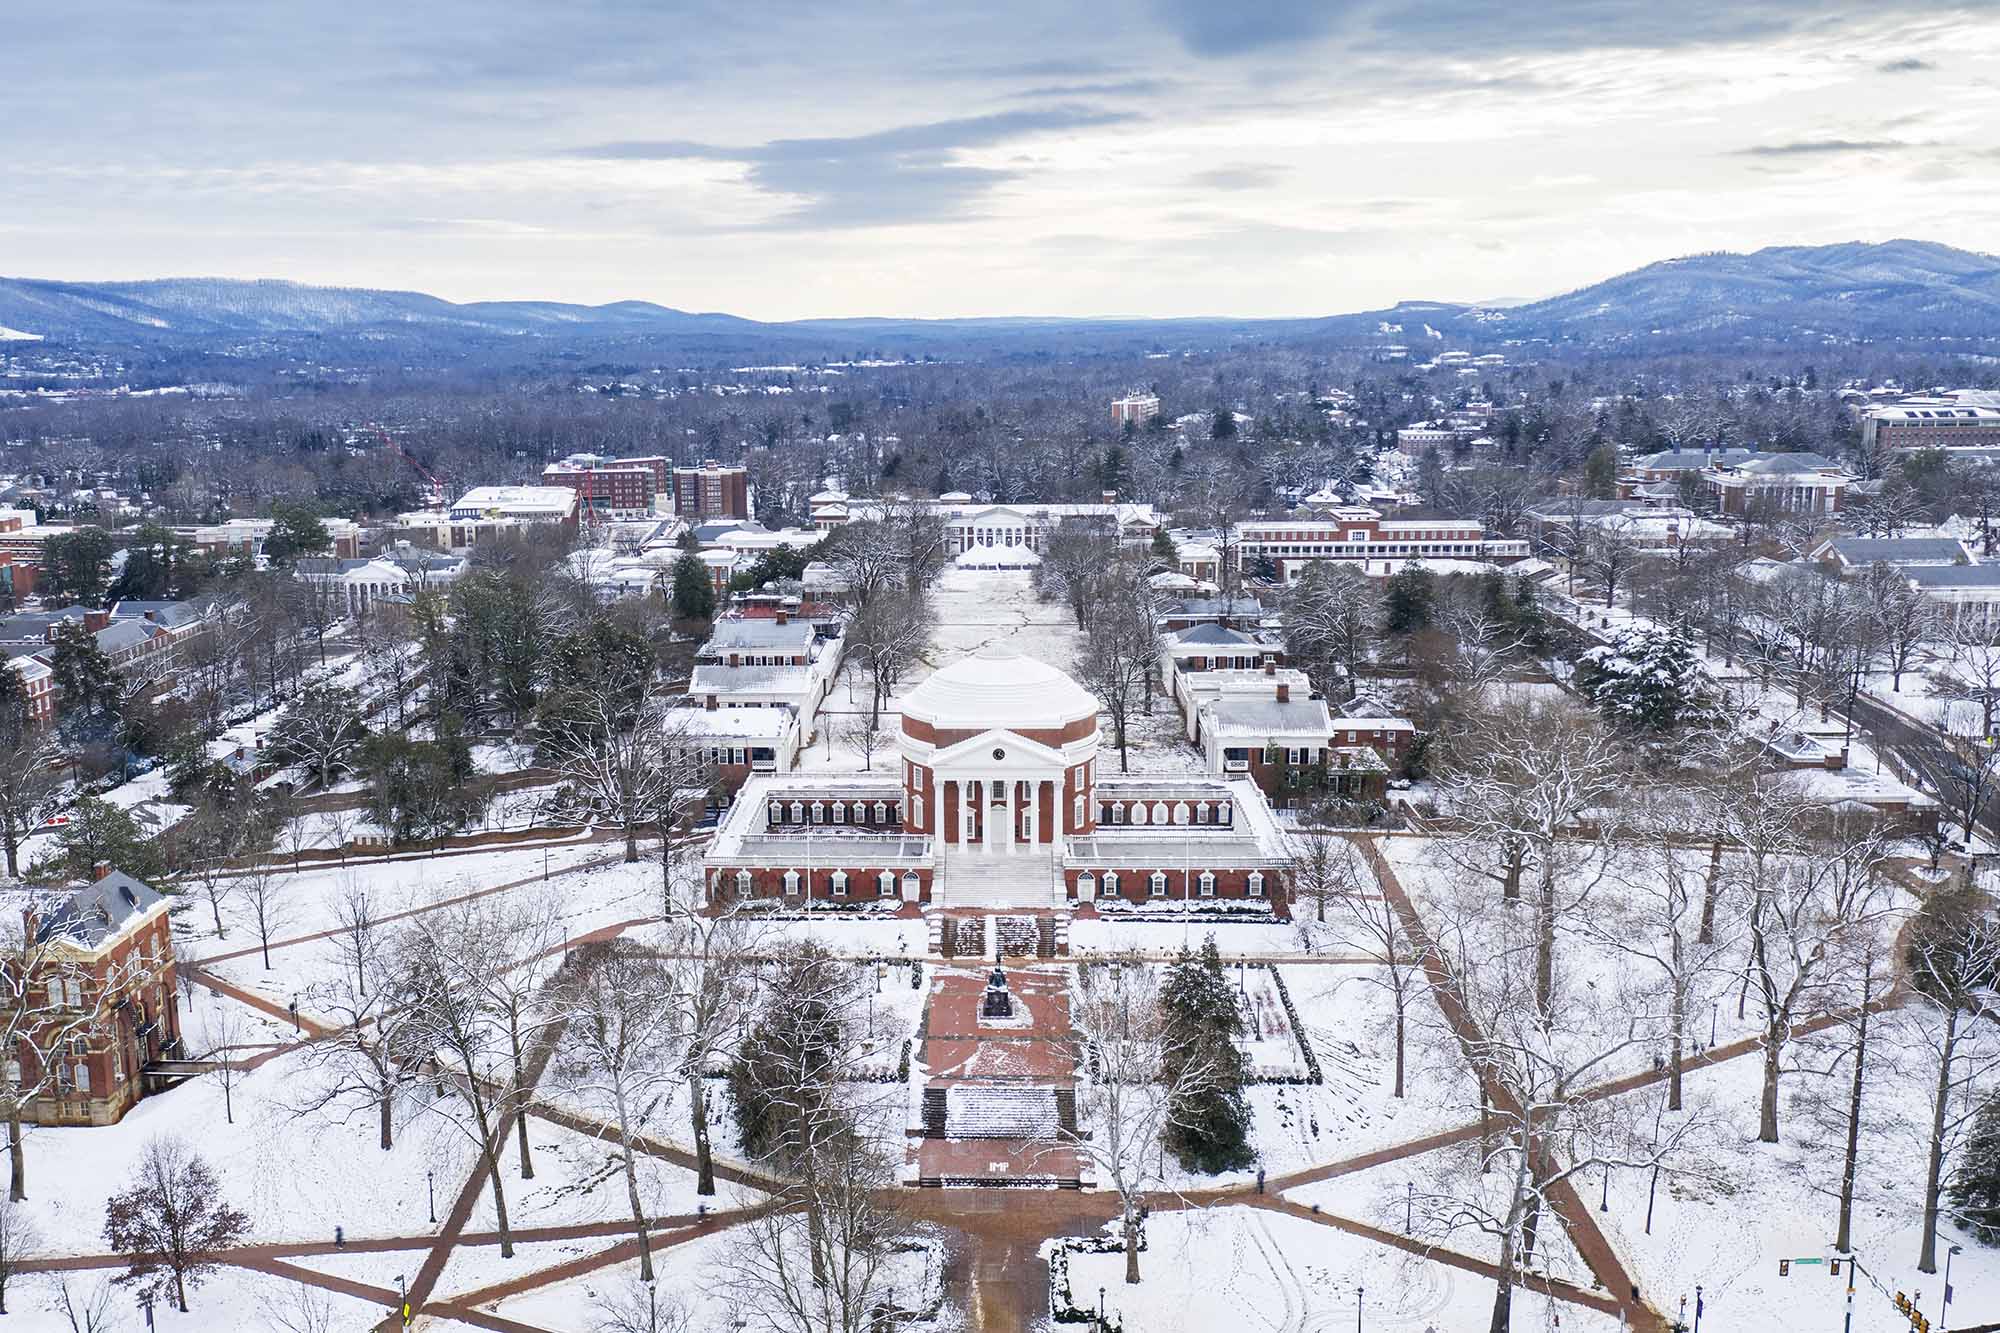 Arial view of a snow covered Rotunda